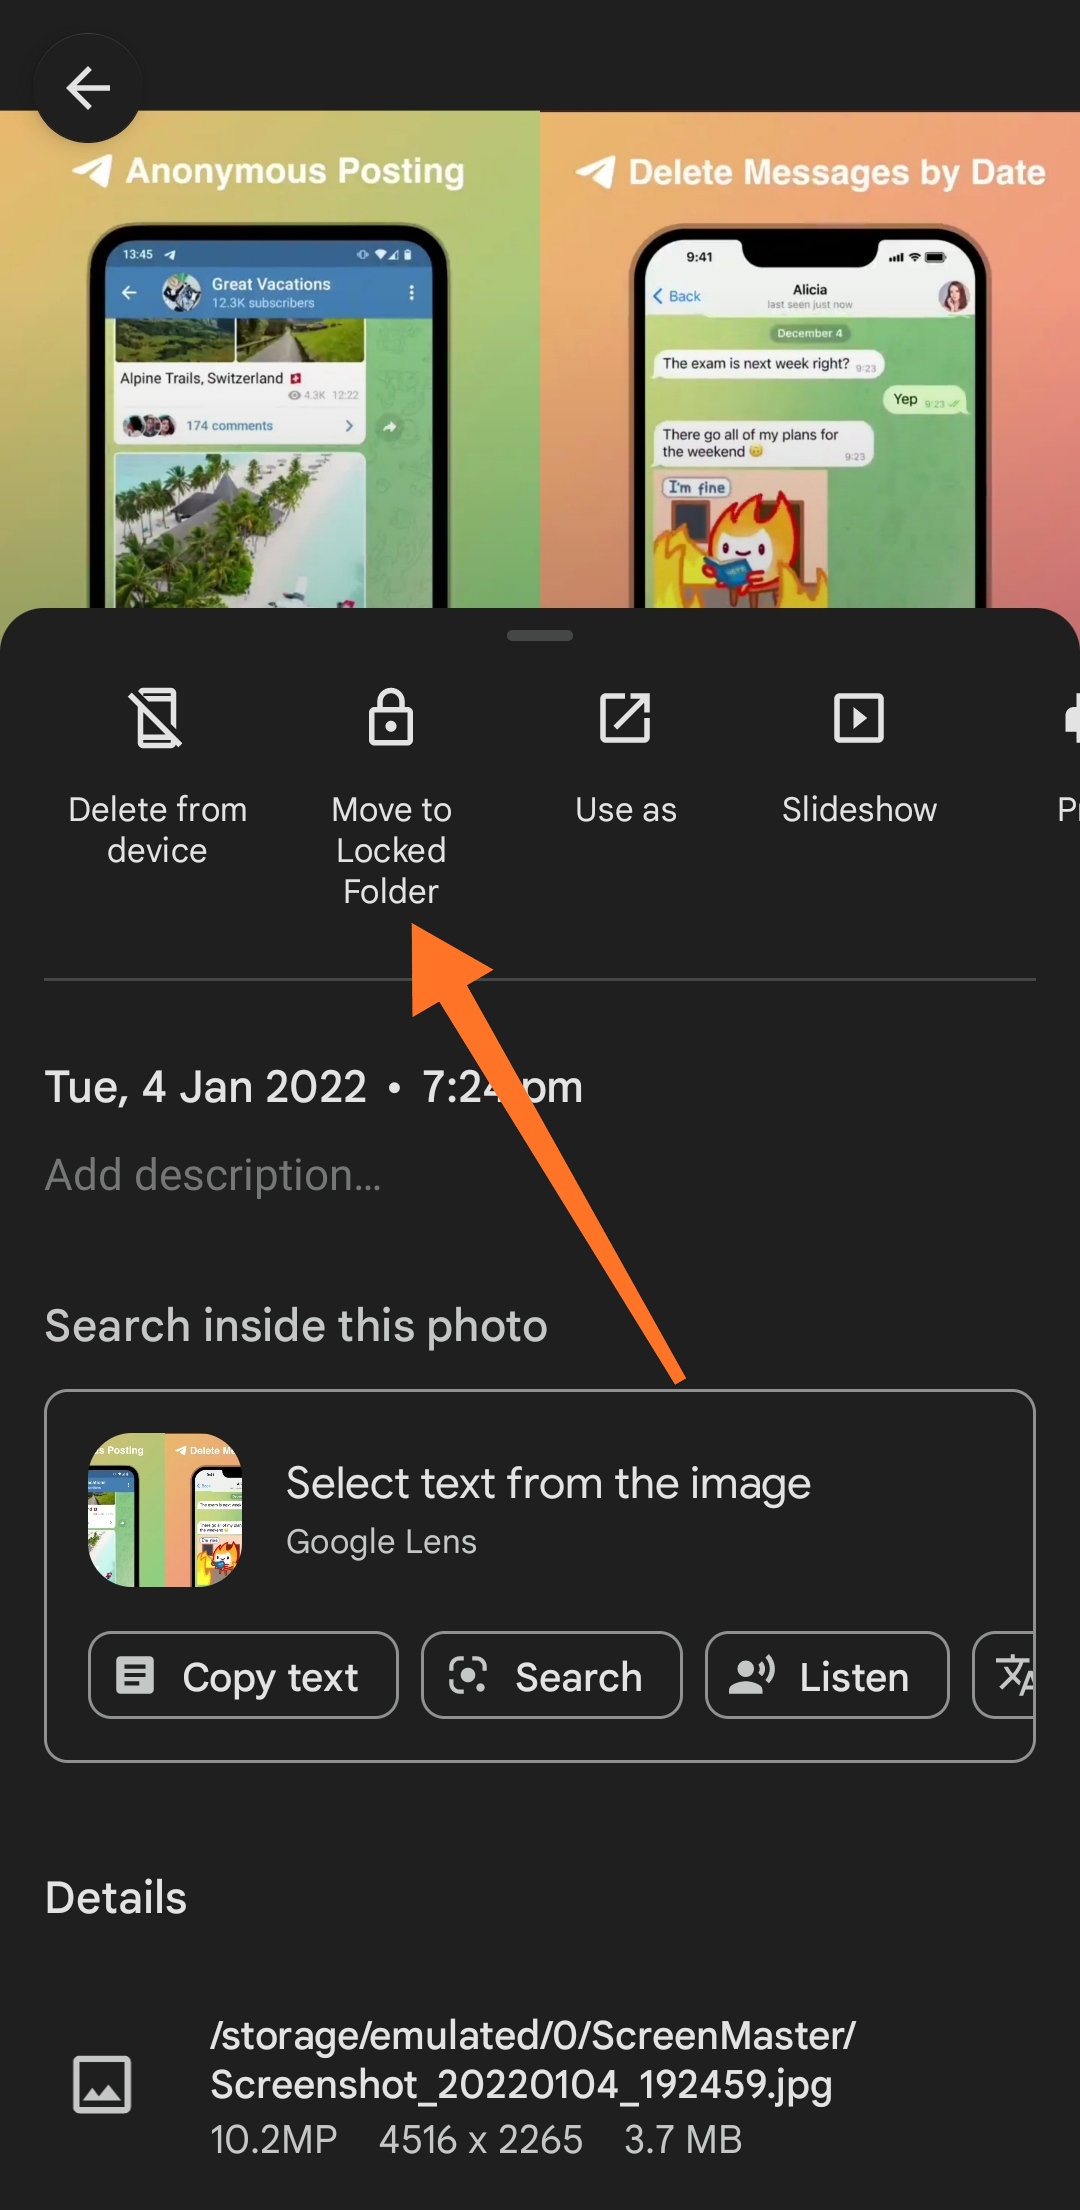 How To Hide Photos In Google Photos in iphone